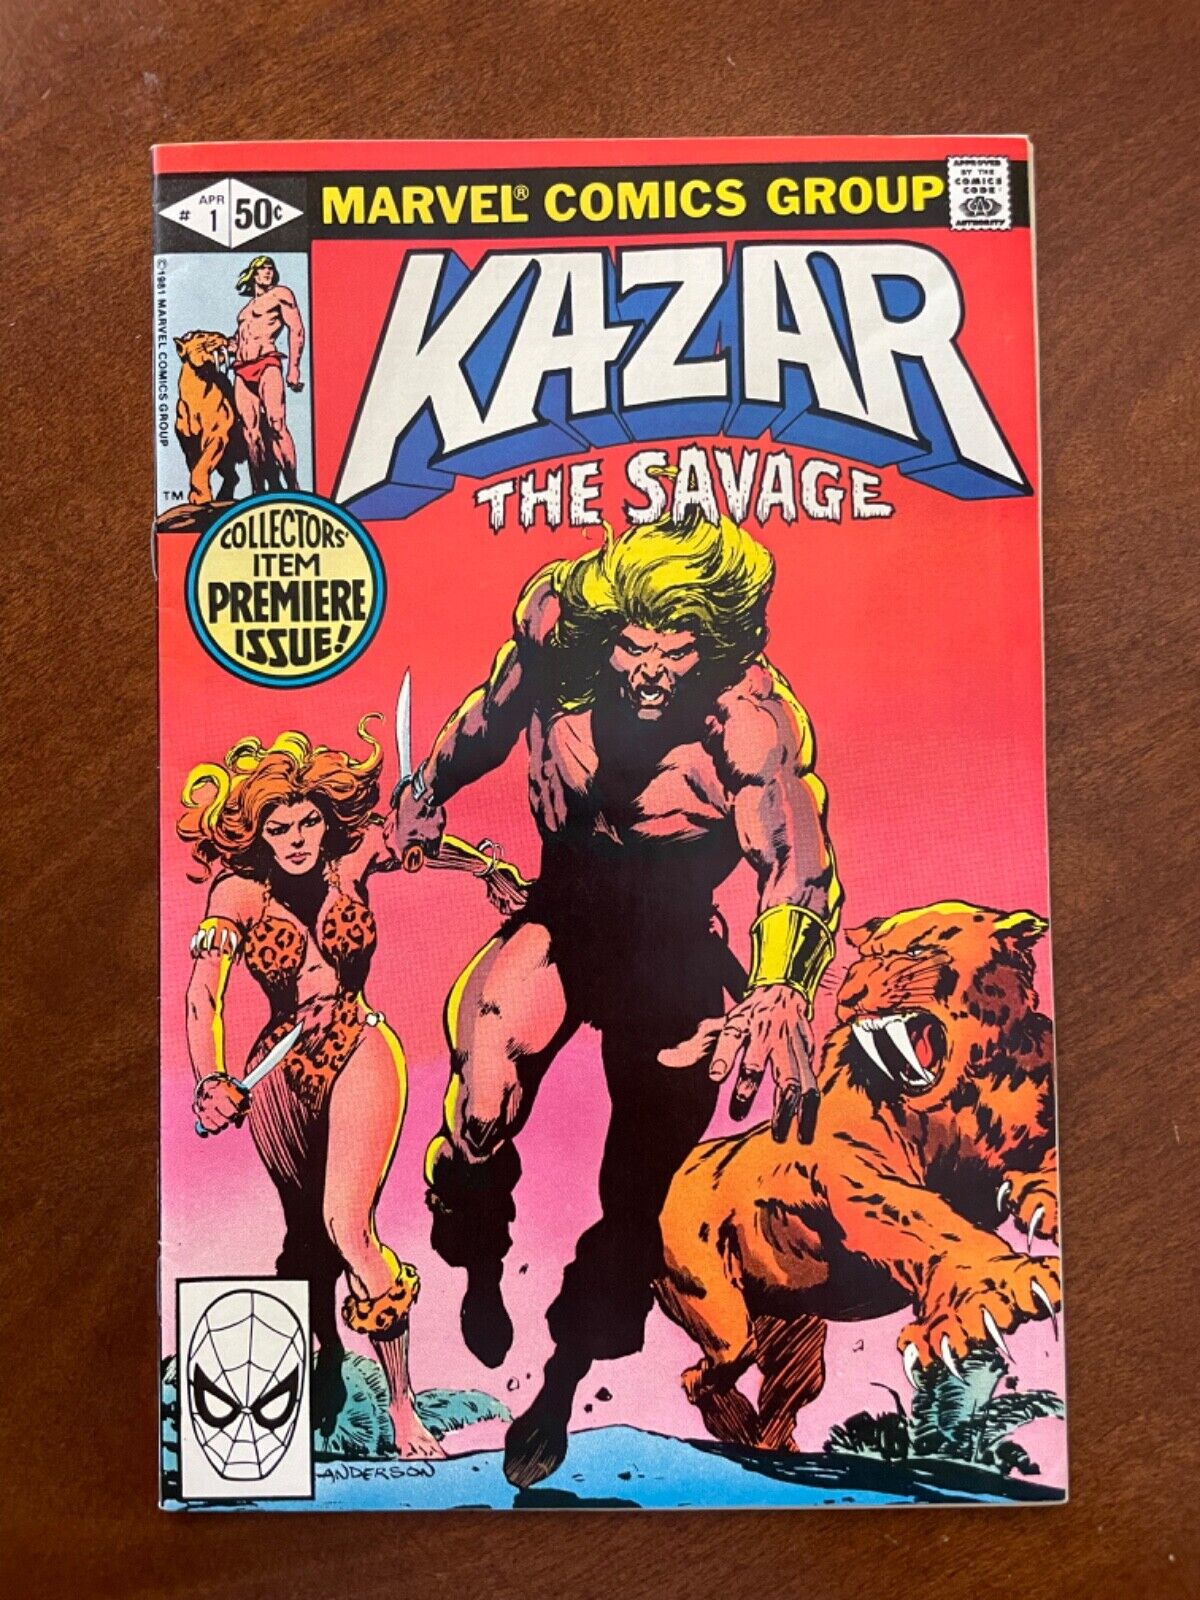 Ka-Zar the Savage, #1-30 (Lot of 30), Marvel (1981) - VF/NM (9.0) or Higher